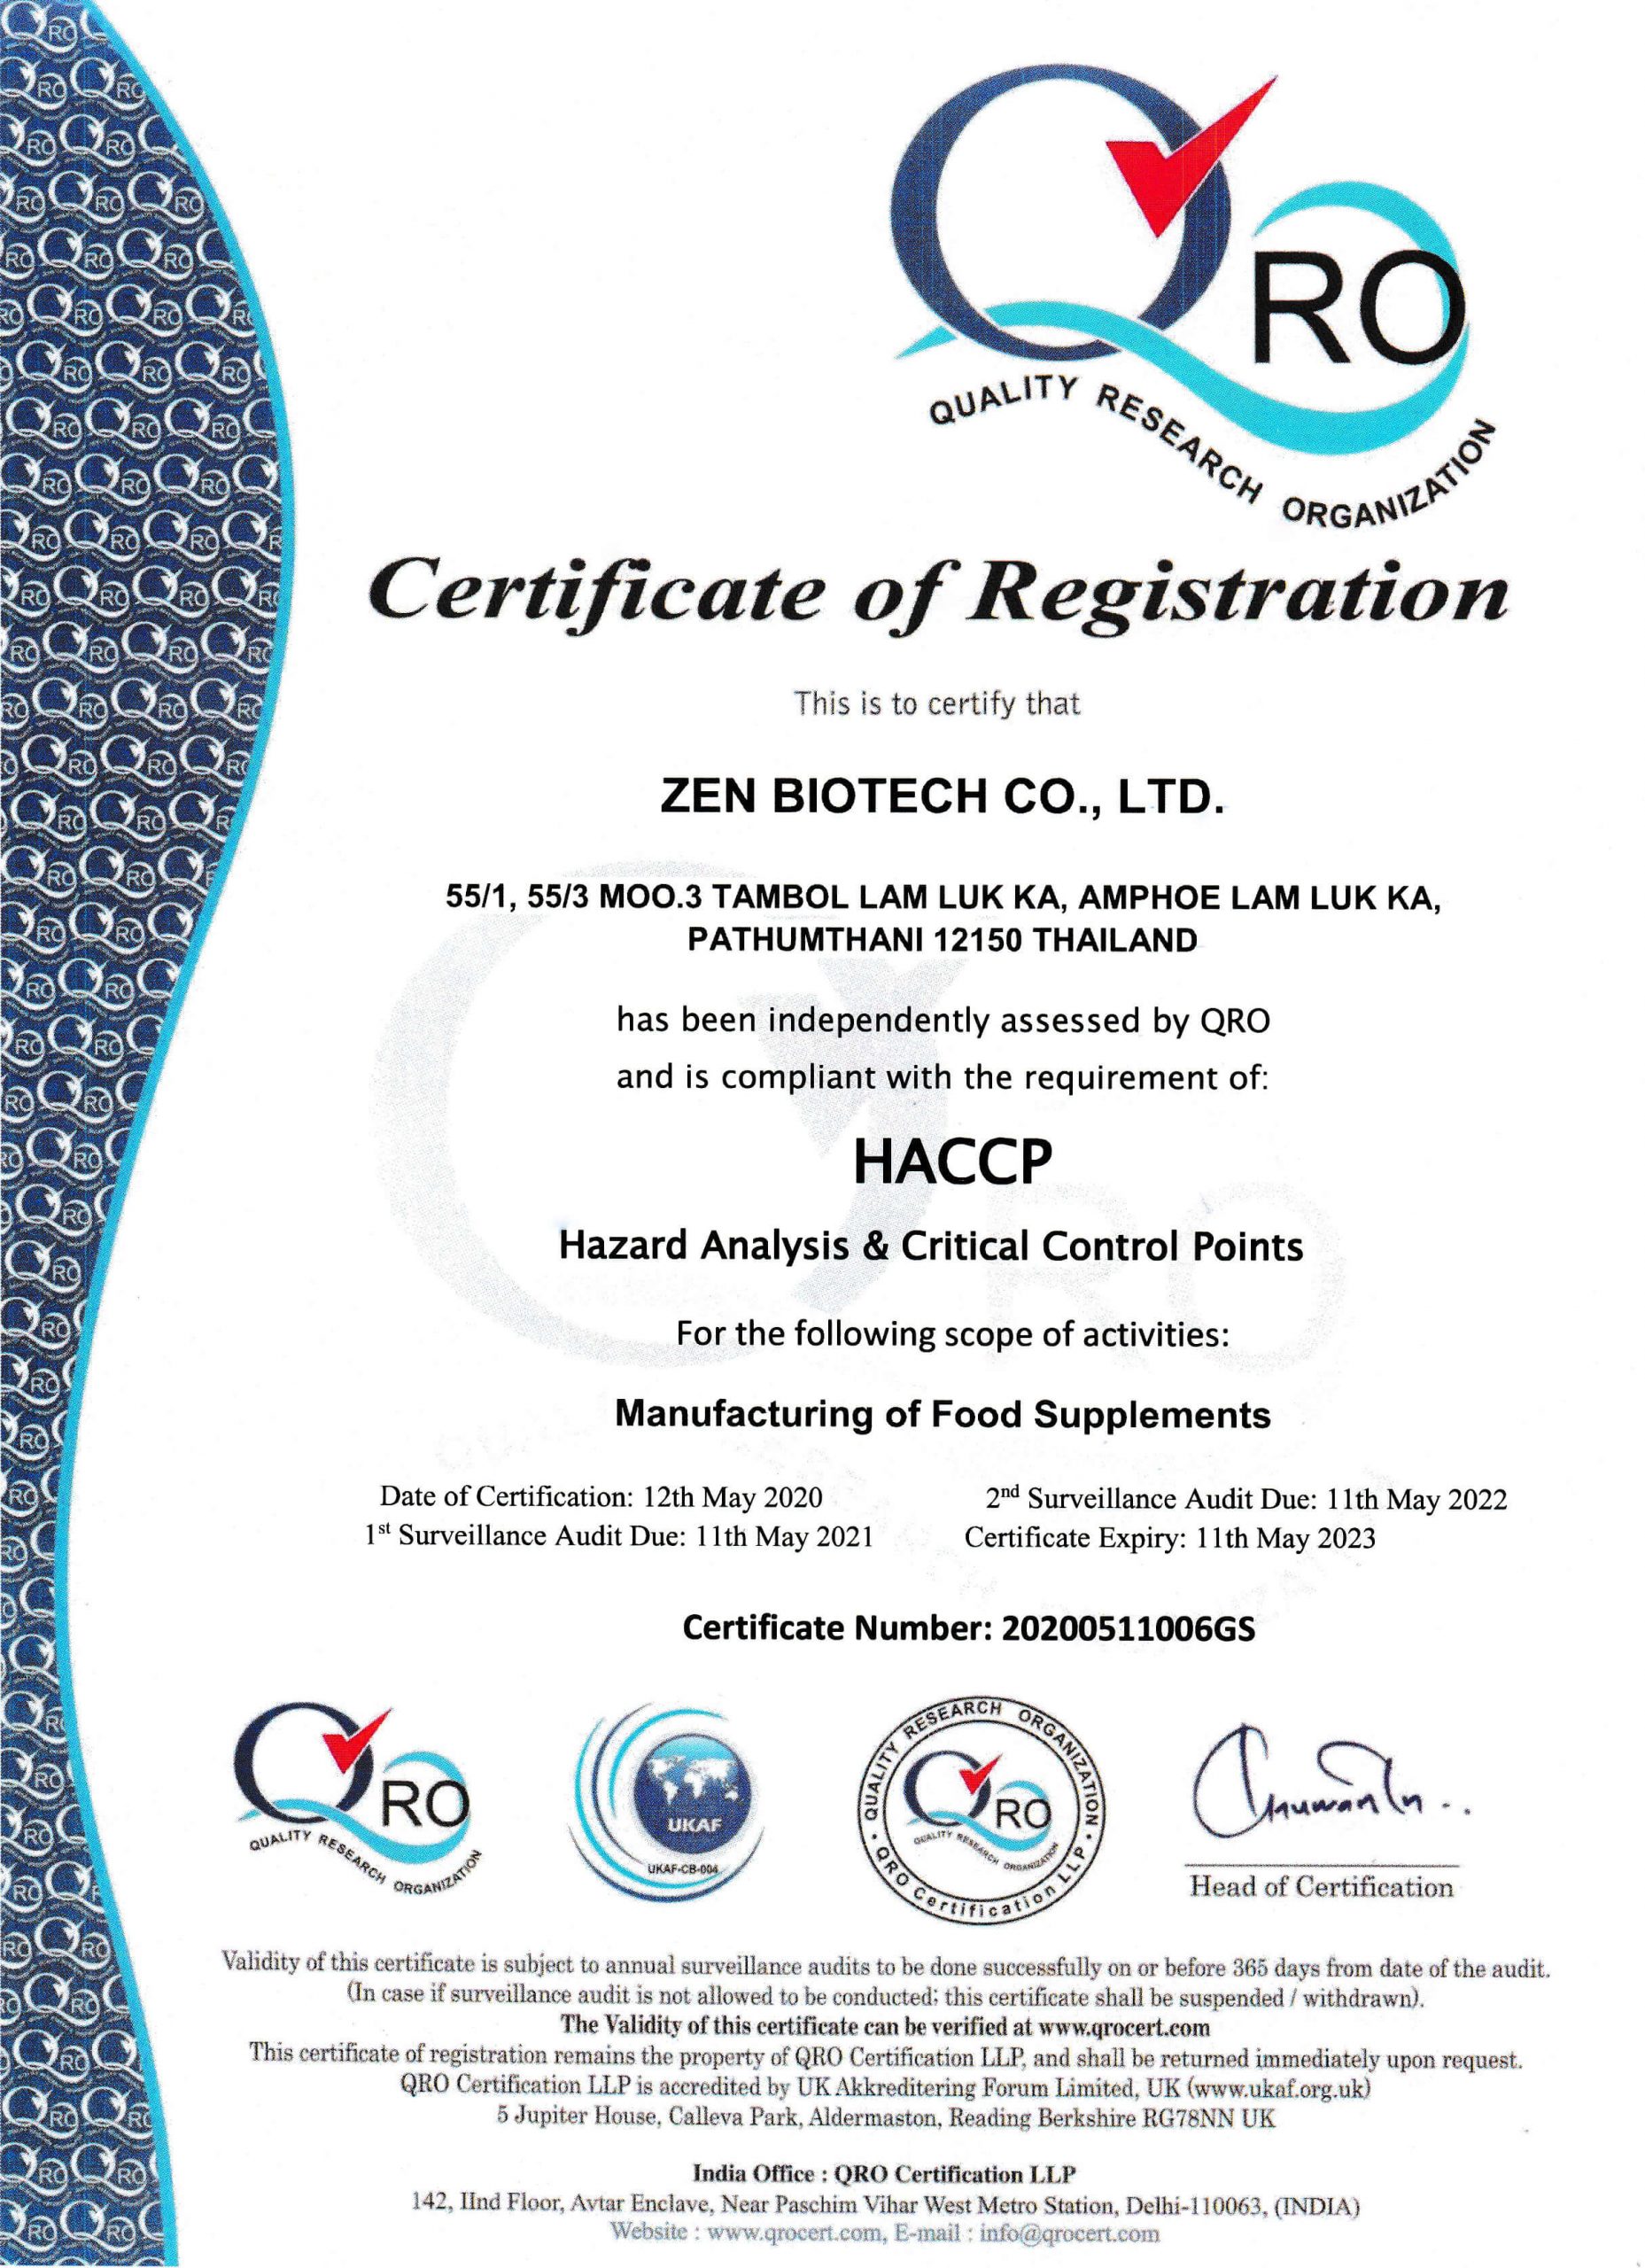 HACCP-scaled